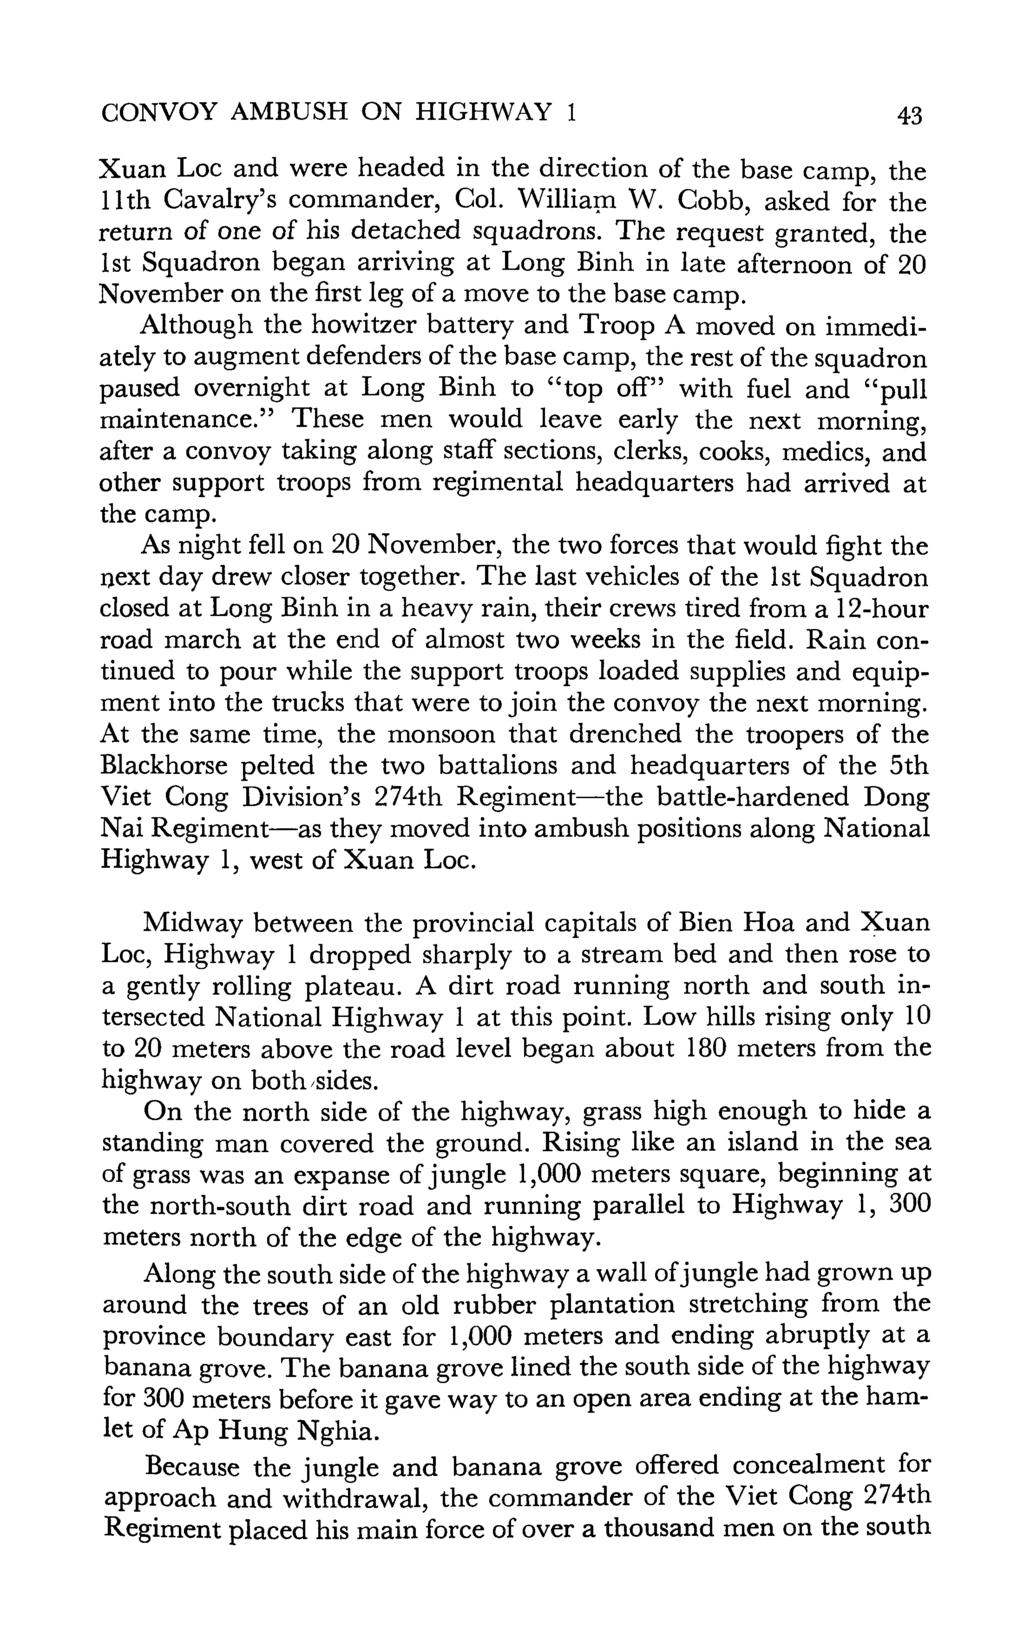 CONVOY AMBUSH ON HIGHWAY 1 43 Xuan Loc and were headed in the direction of the base camp, the 11th Cavalry's commander, Col. William W. Cobb, asked for the return of one of his detached squadrons.